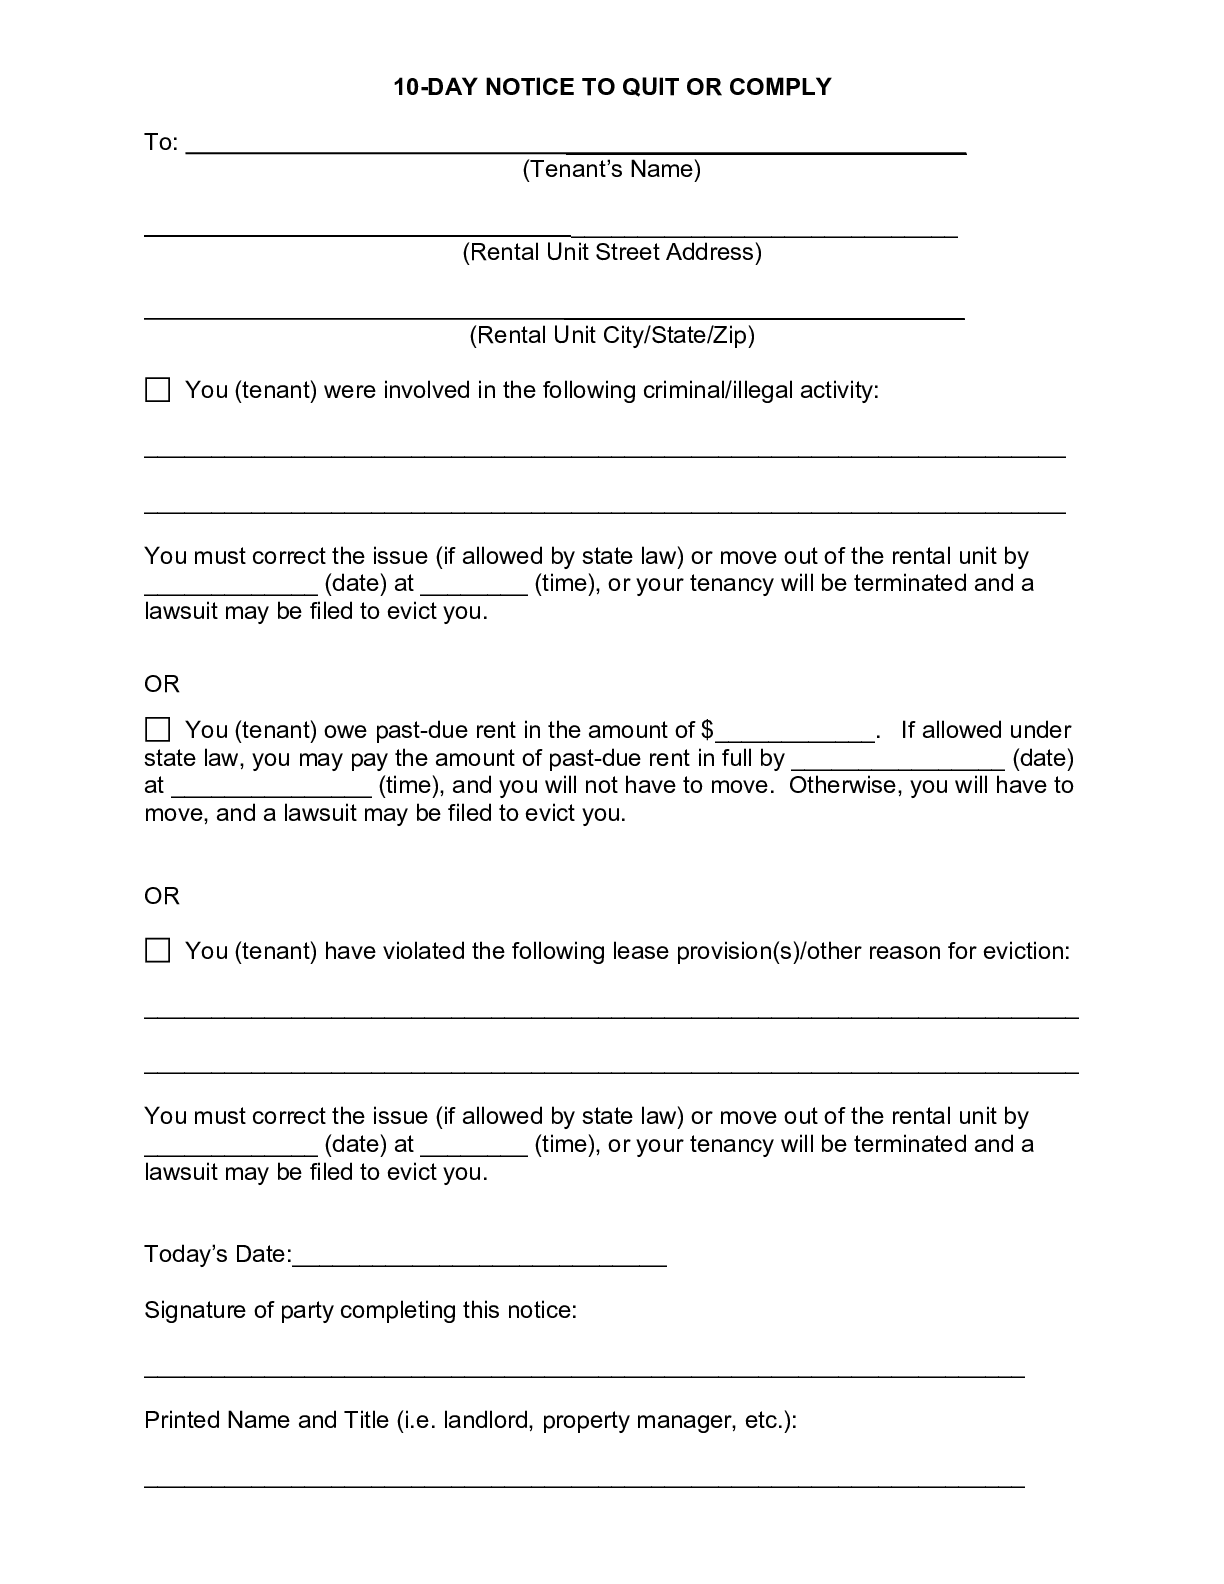 10-day-eviction-notice-template